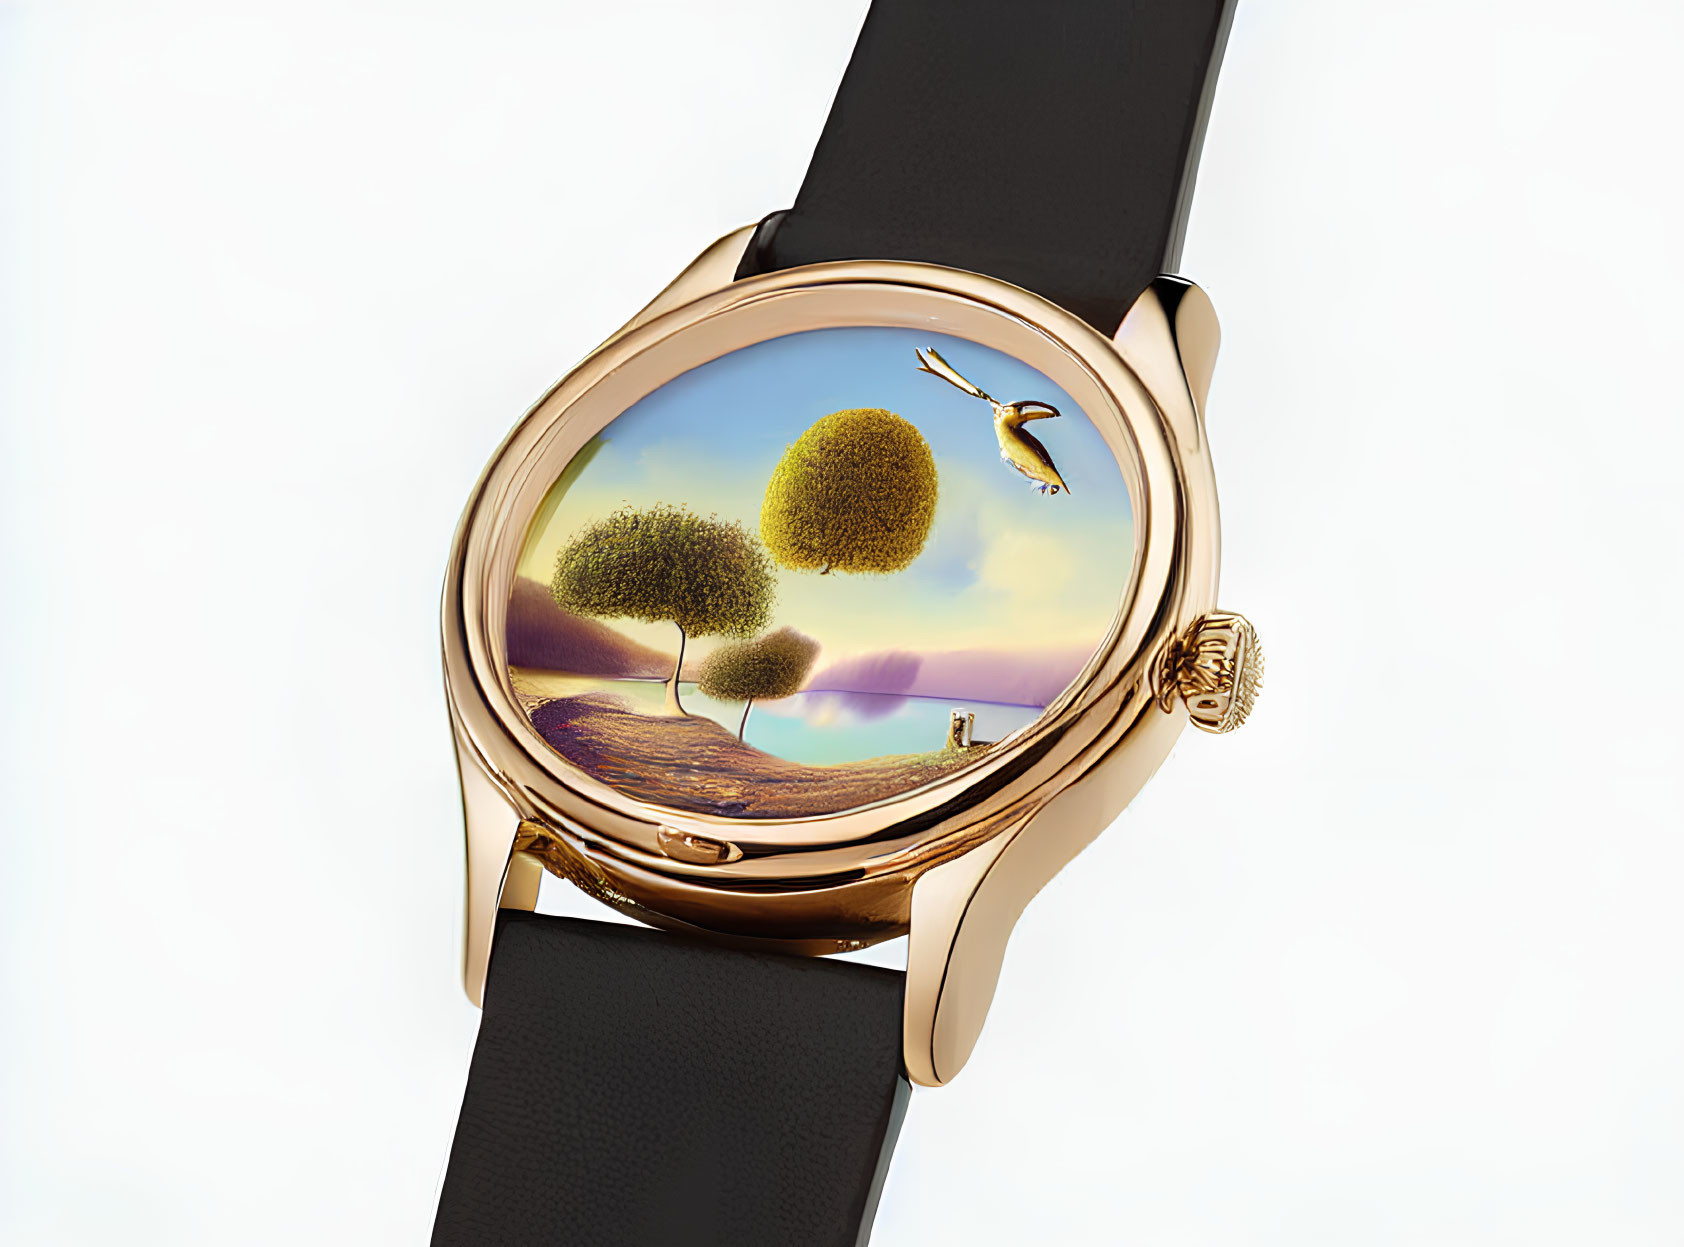 Luxurious Black Strap Watch with Surreal Landscape Dial